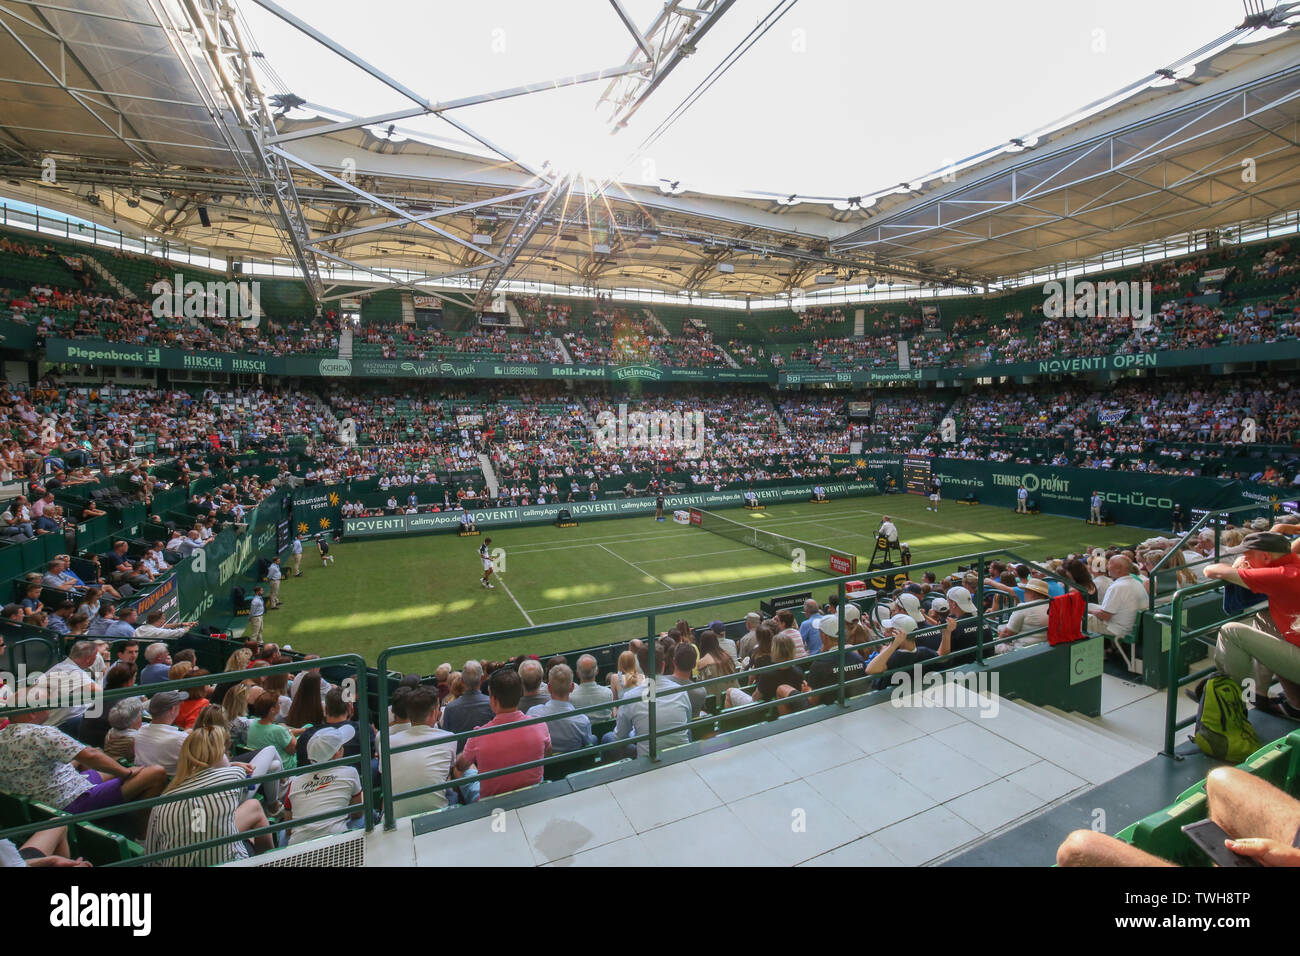 Halle, Germany. 17th June, 2019. Tennis: ATP-Tour singles, men, 1st round,  Haase (Netherlands) - Zverev (Germany). Spectators sit on the grandstand of  the stadium, which can open and close its roof. Credit: